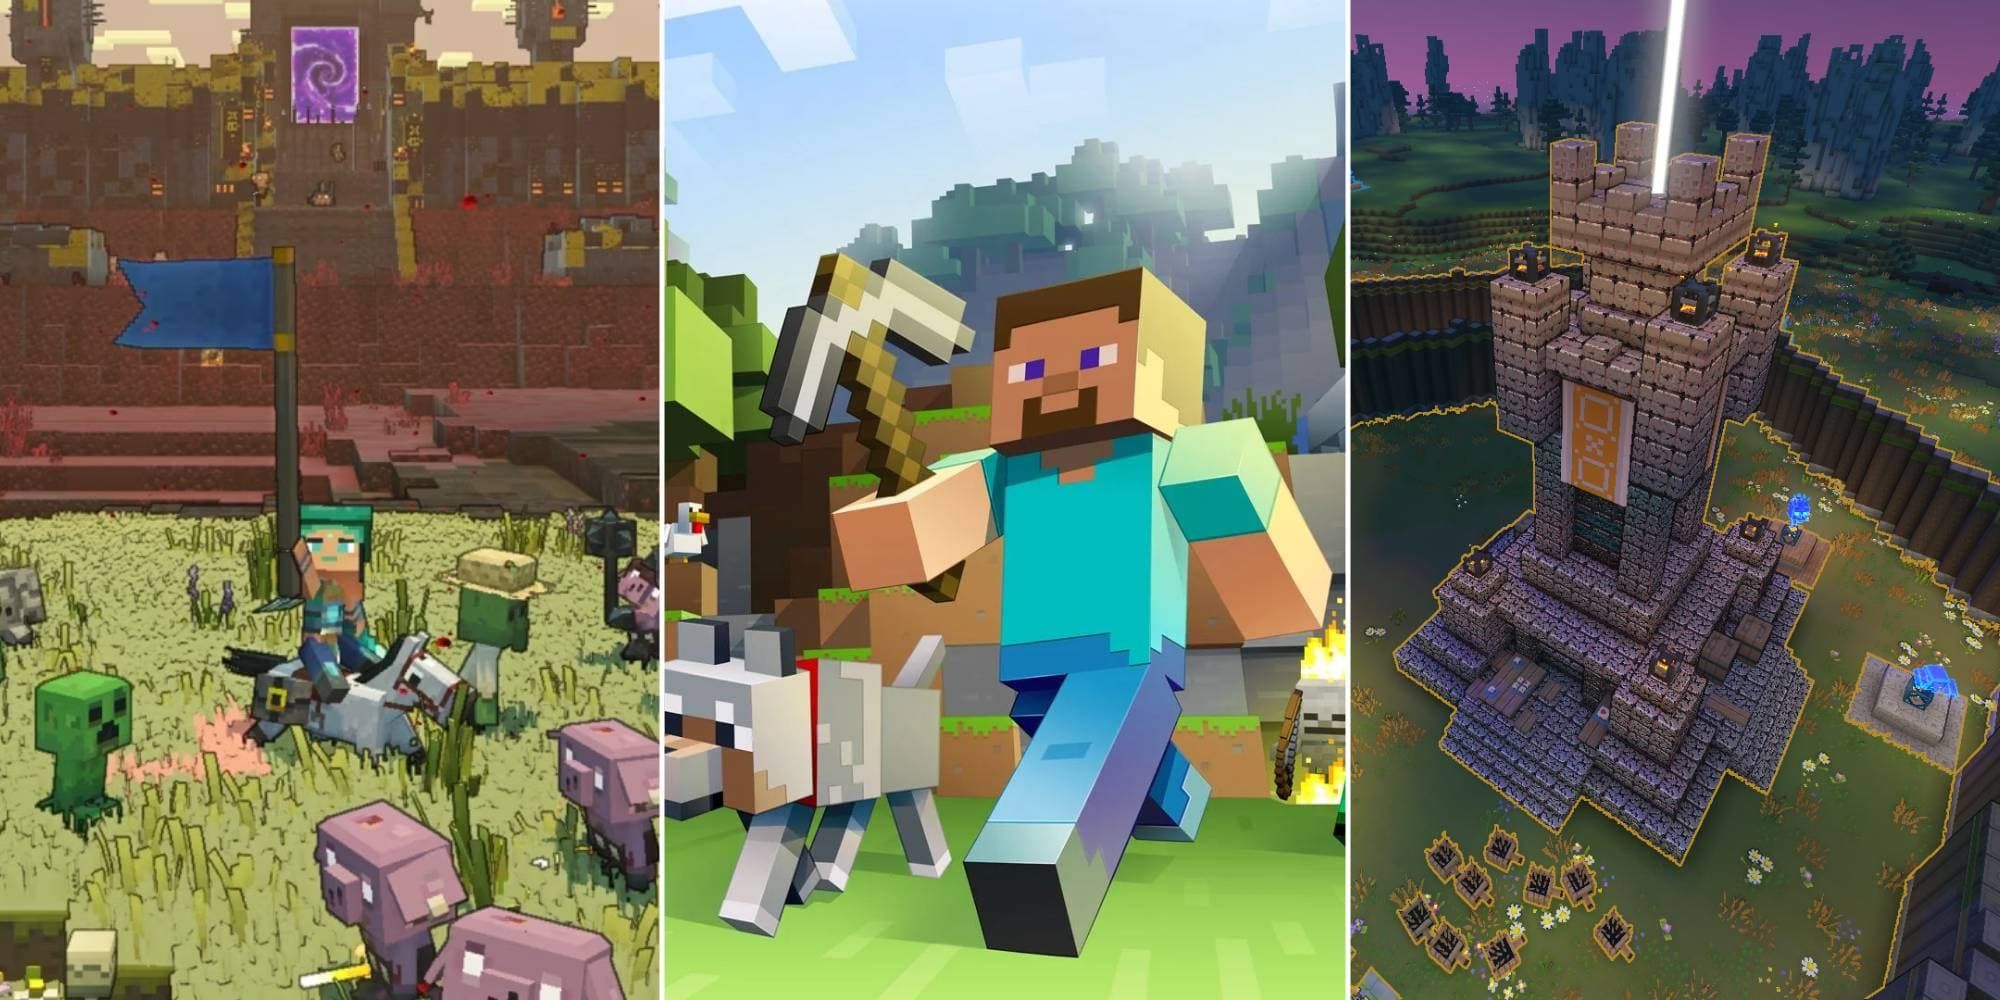 A player battles in the Minecraft Legends campaign, Steve walks with a pickaxe in Minecraft, and a tower is built in Minecraft Legends' PVP mode.